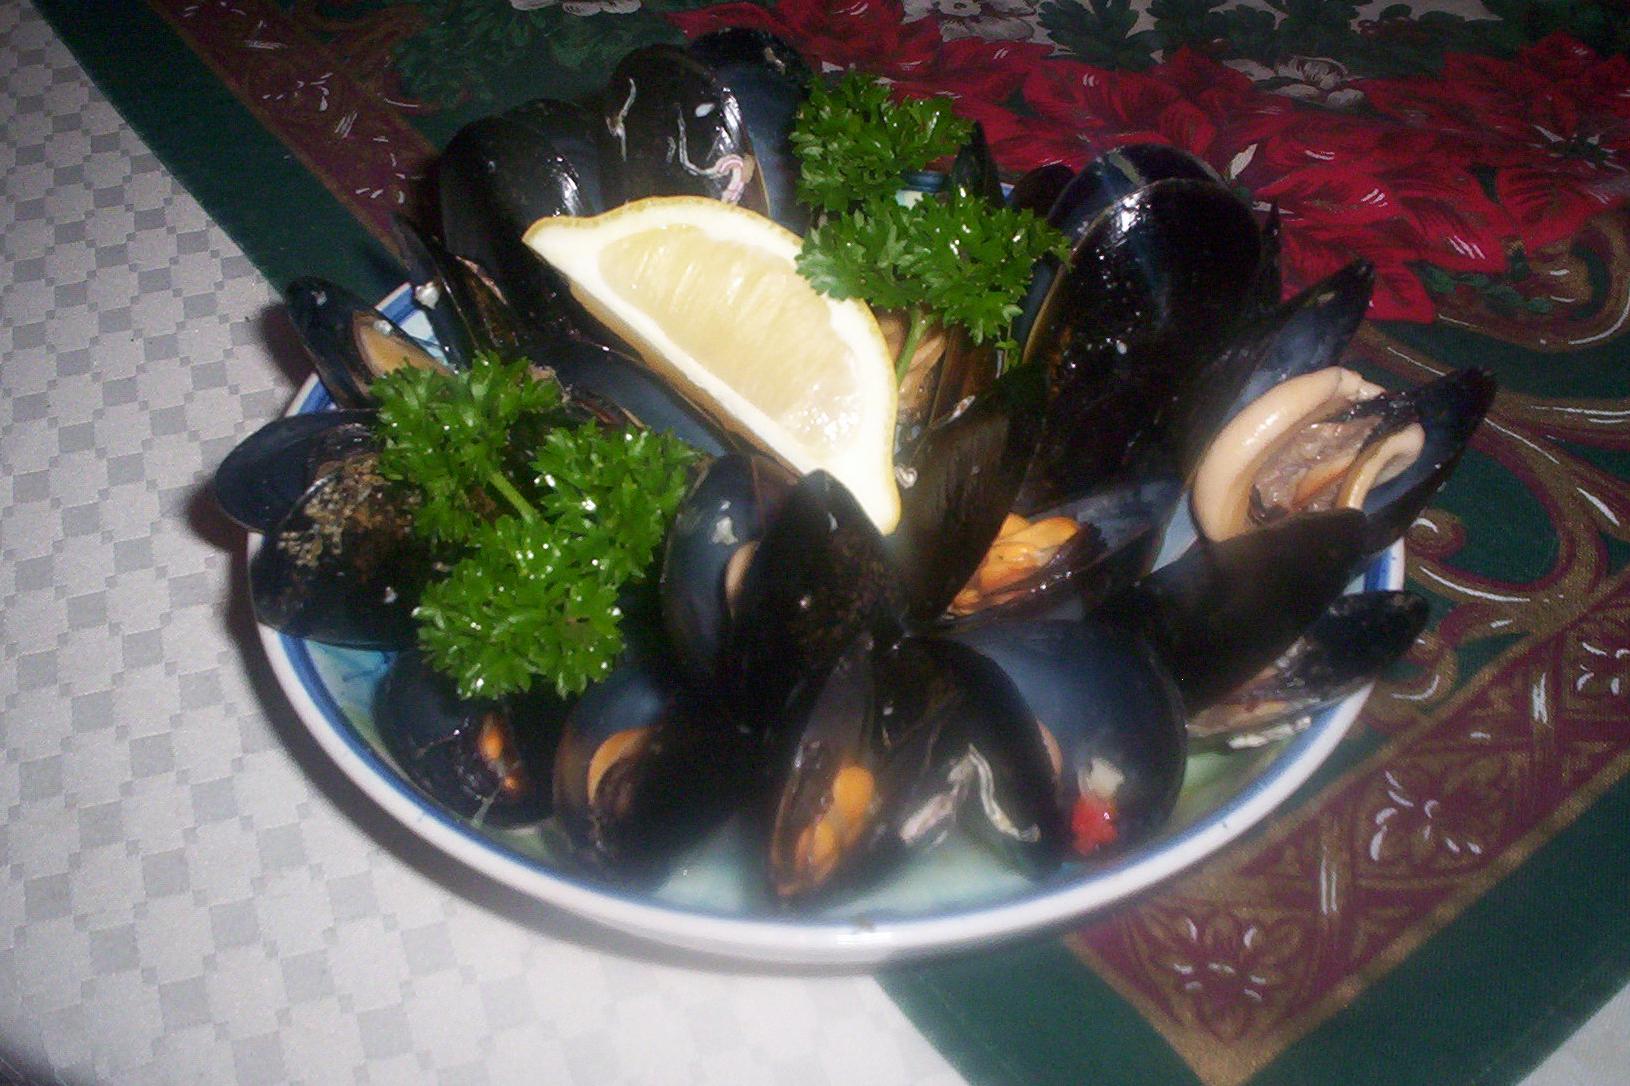  The perfect partner for this mussel dish is a glass of light, fruity white wine.